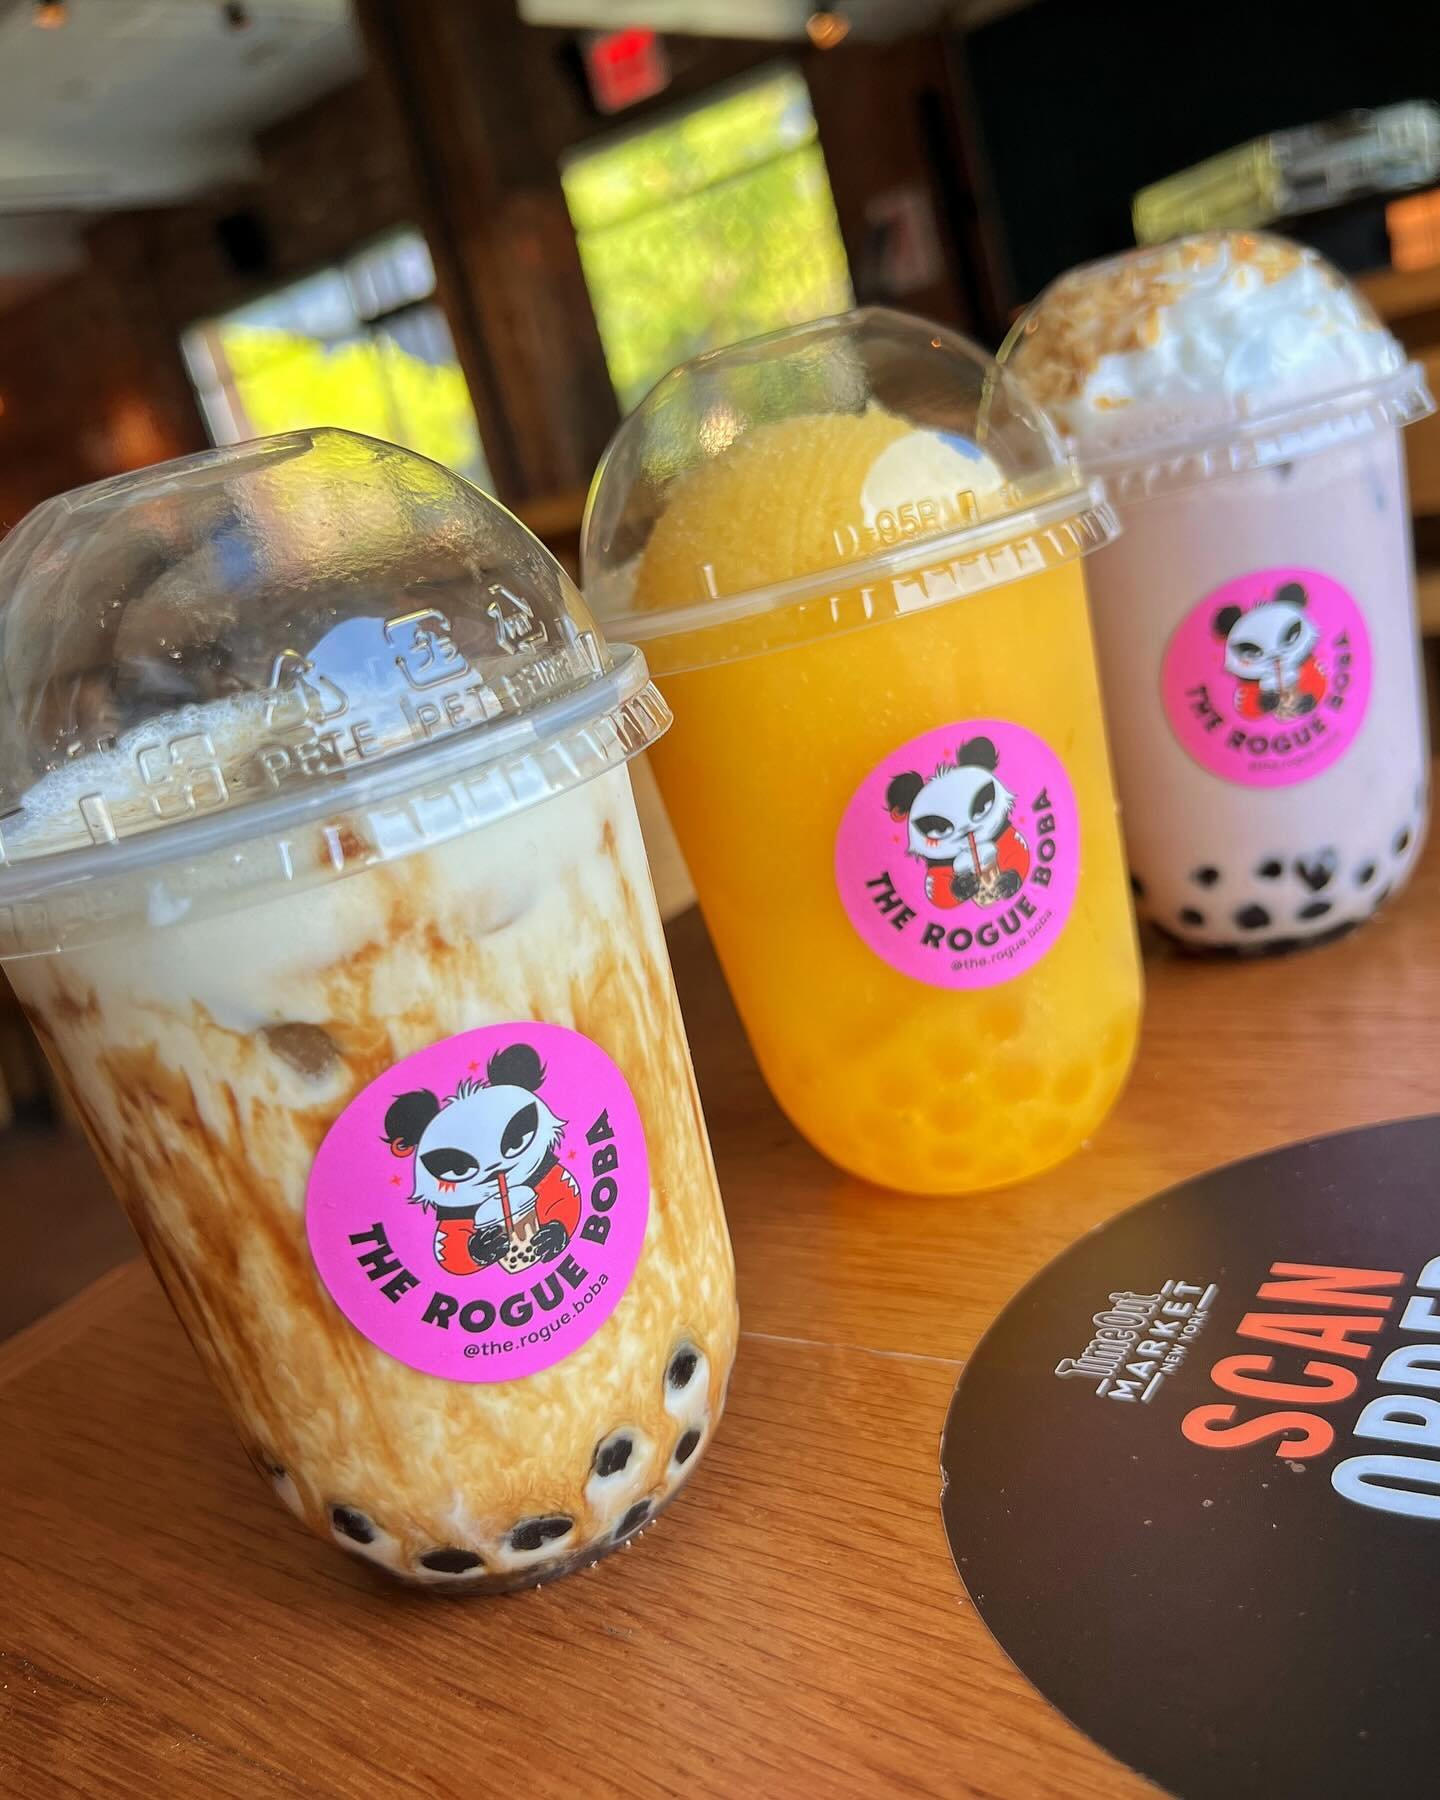 Don&rsquo;t forget to checkout our sister restaurant @the.rogue.boba and they all of our DELICIOUS BOBA! 🧋🤩🧋
#ROGUEPANDA #NYC
📍ROOFTOP LEVEL at @timeoutmarket!
🧋 Visit our sister restaurant @the.rogue.boba!